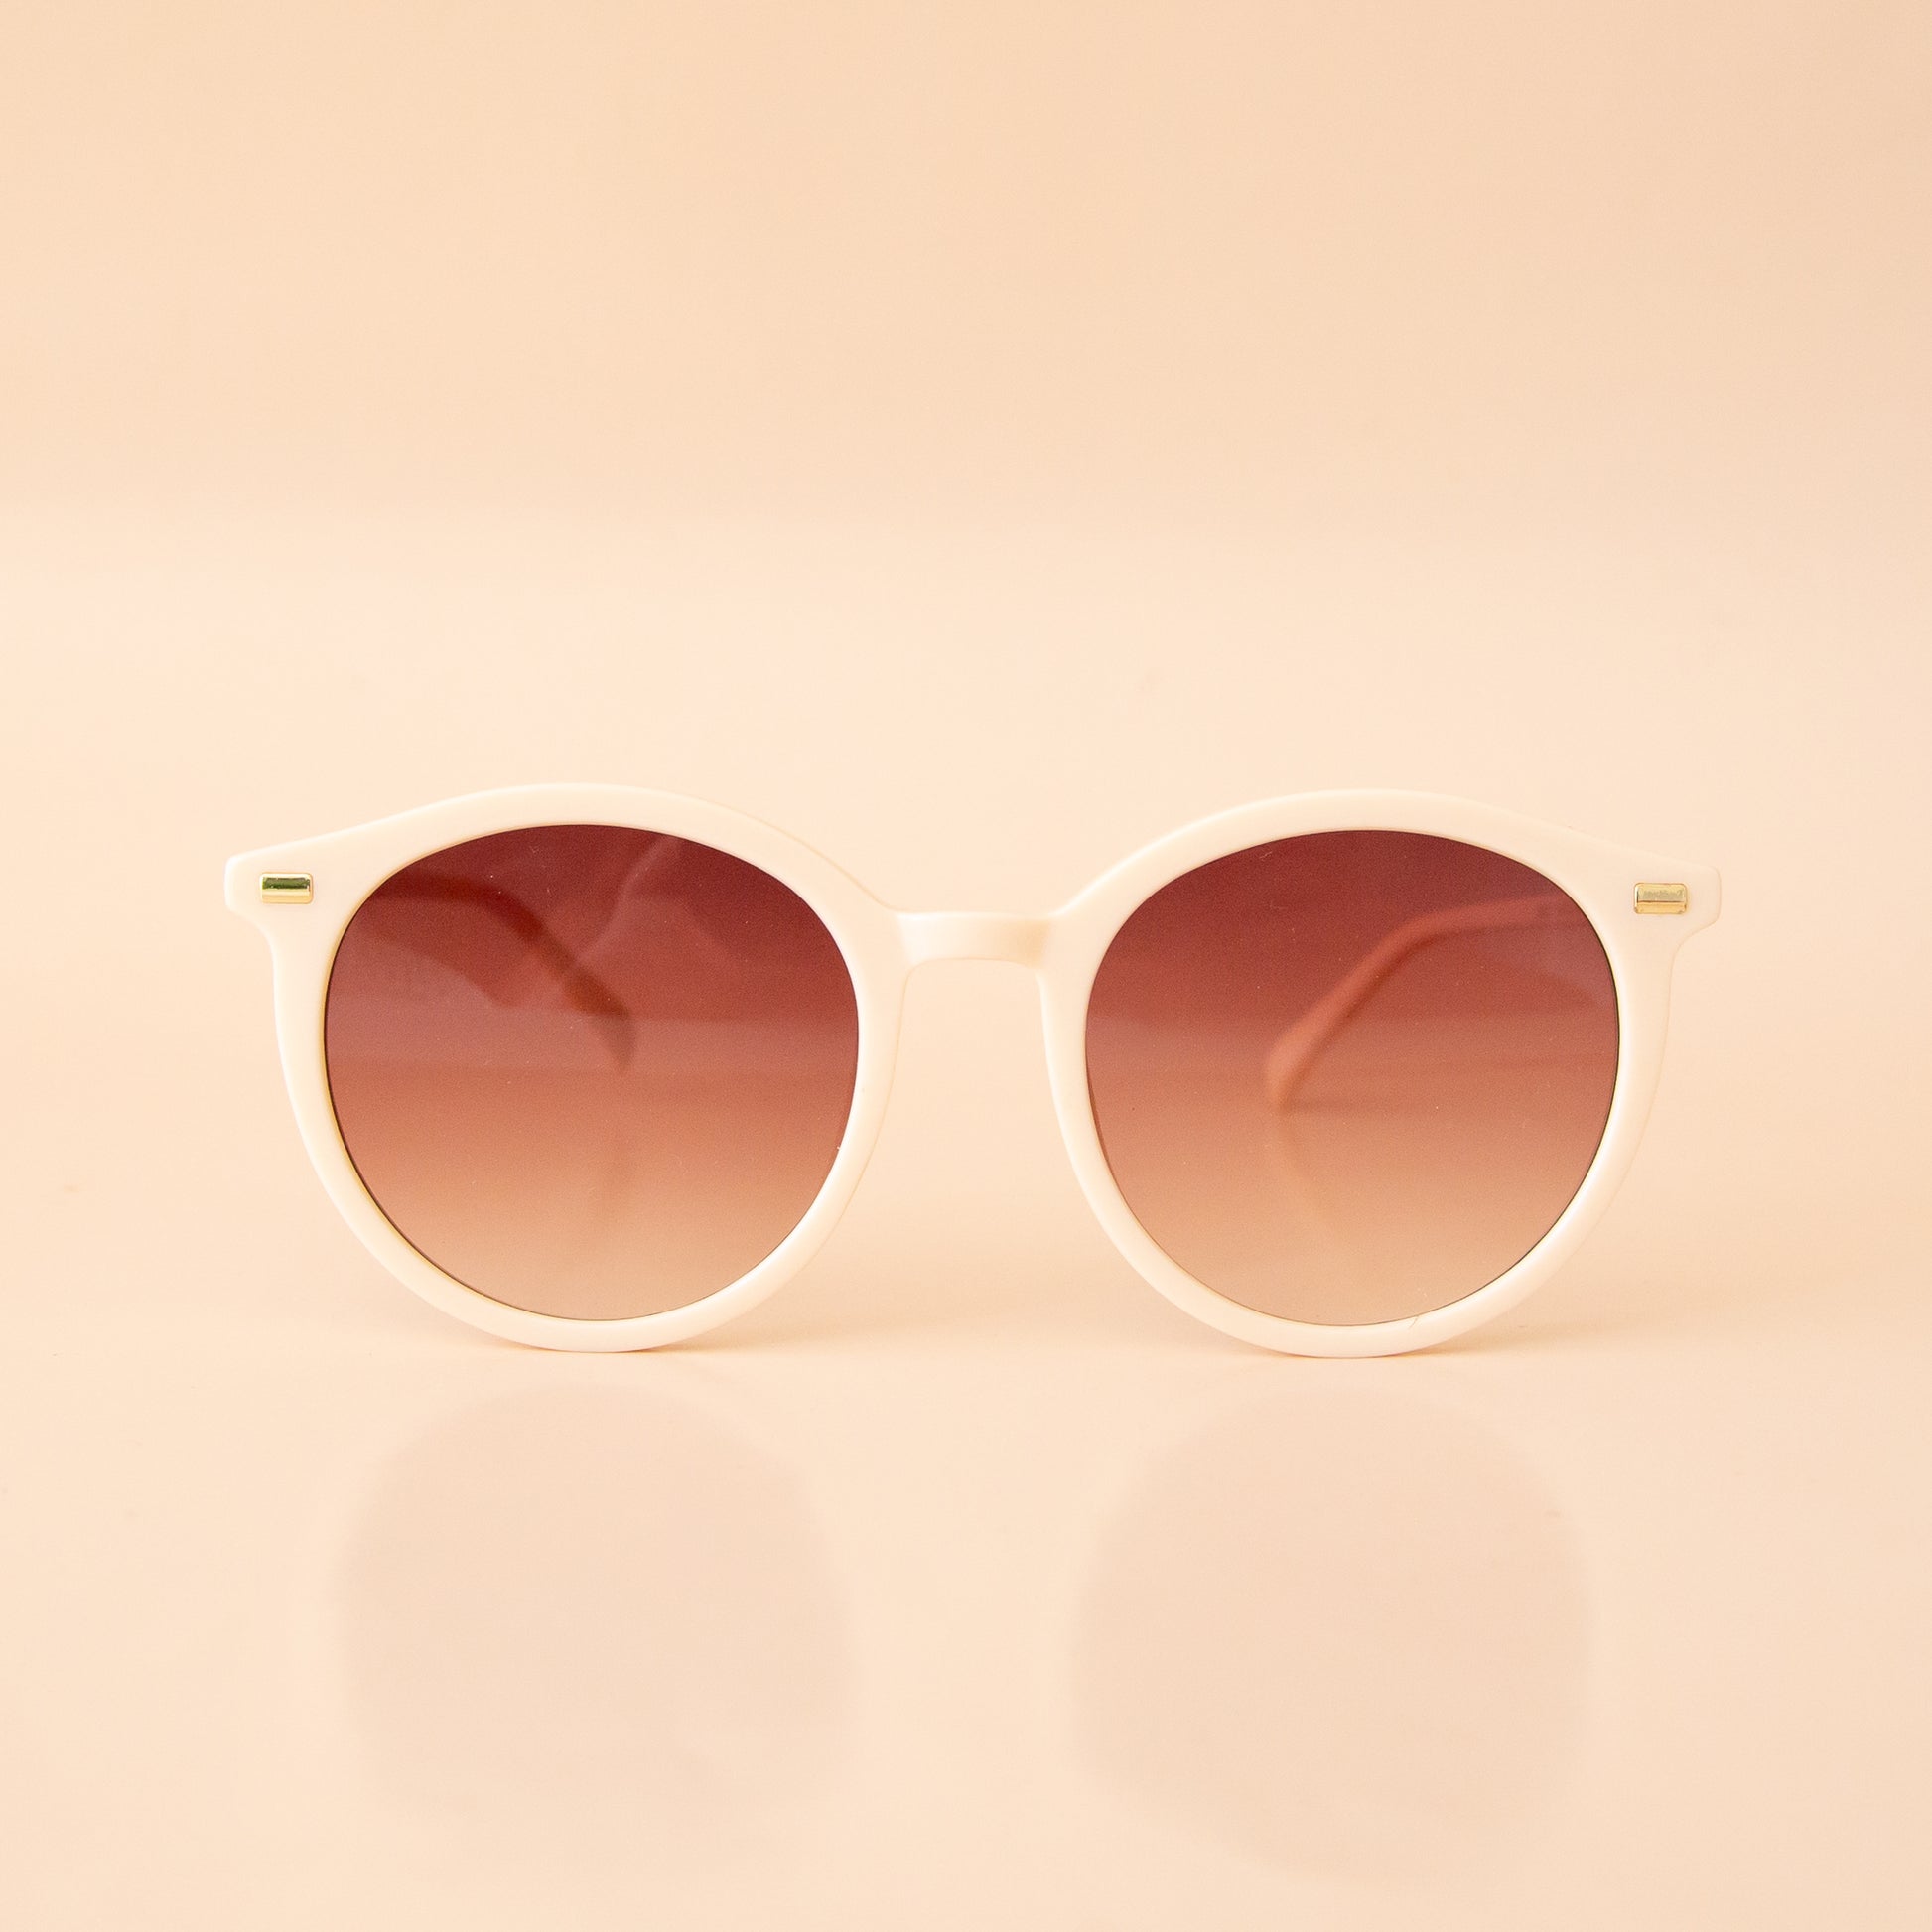 A white pair of rounded sunglasses with a brown lens.